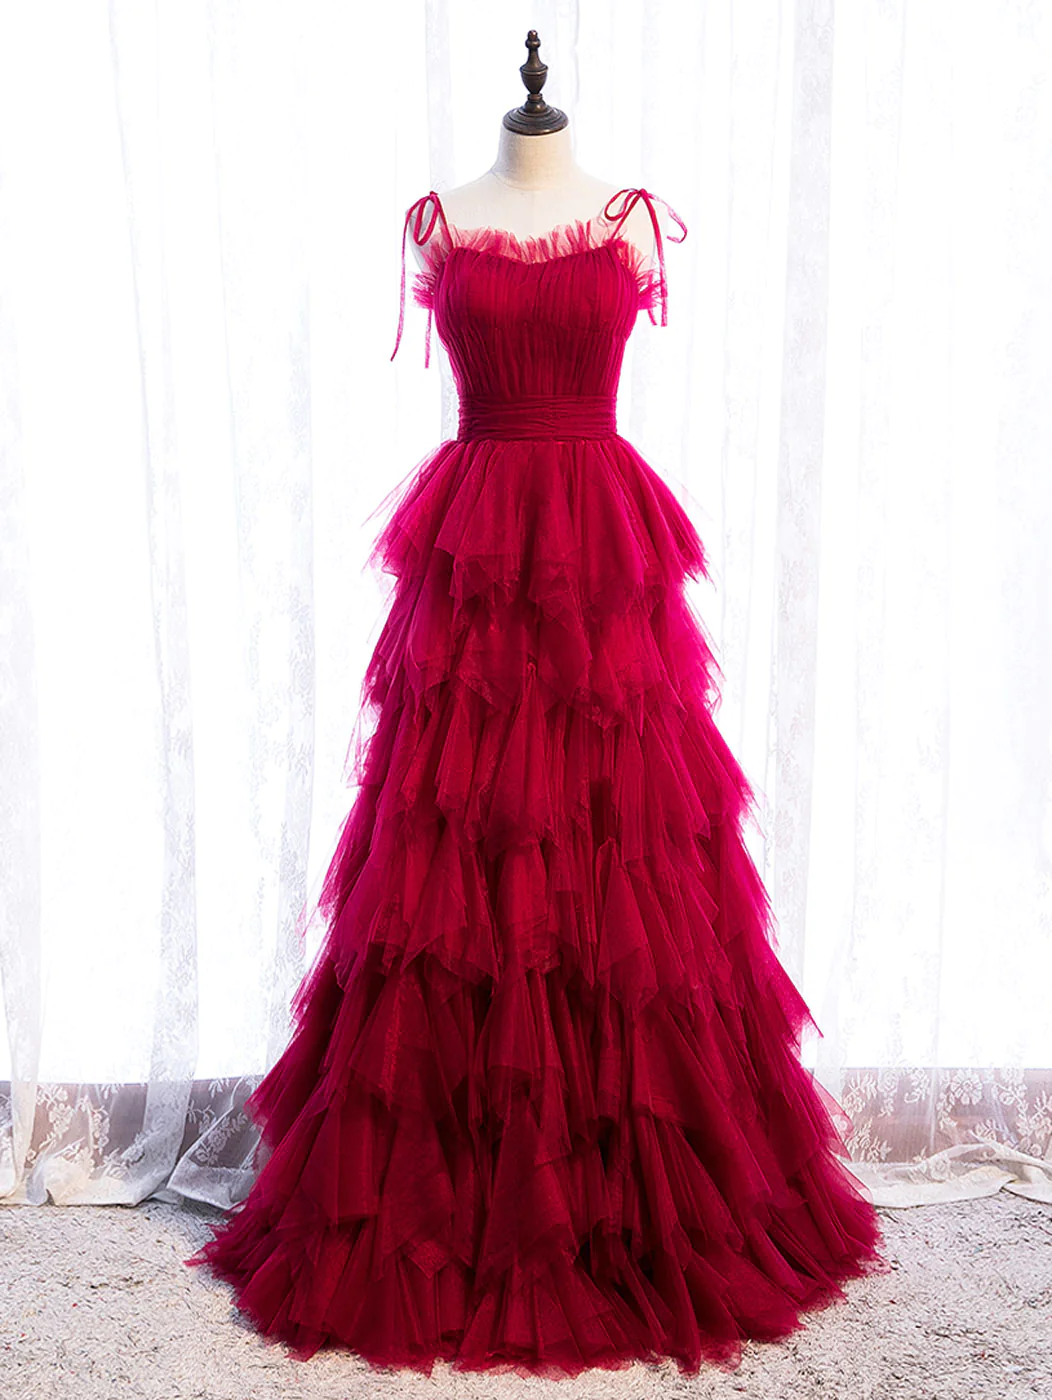 Majestic Ruby Red Tulle Gown With Tie-shoulder Detail